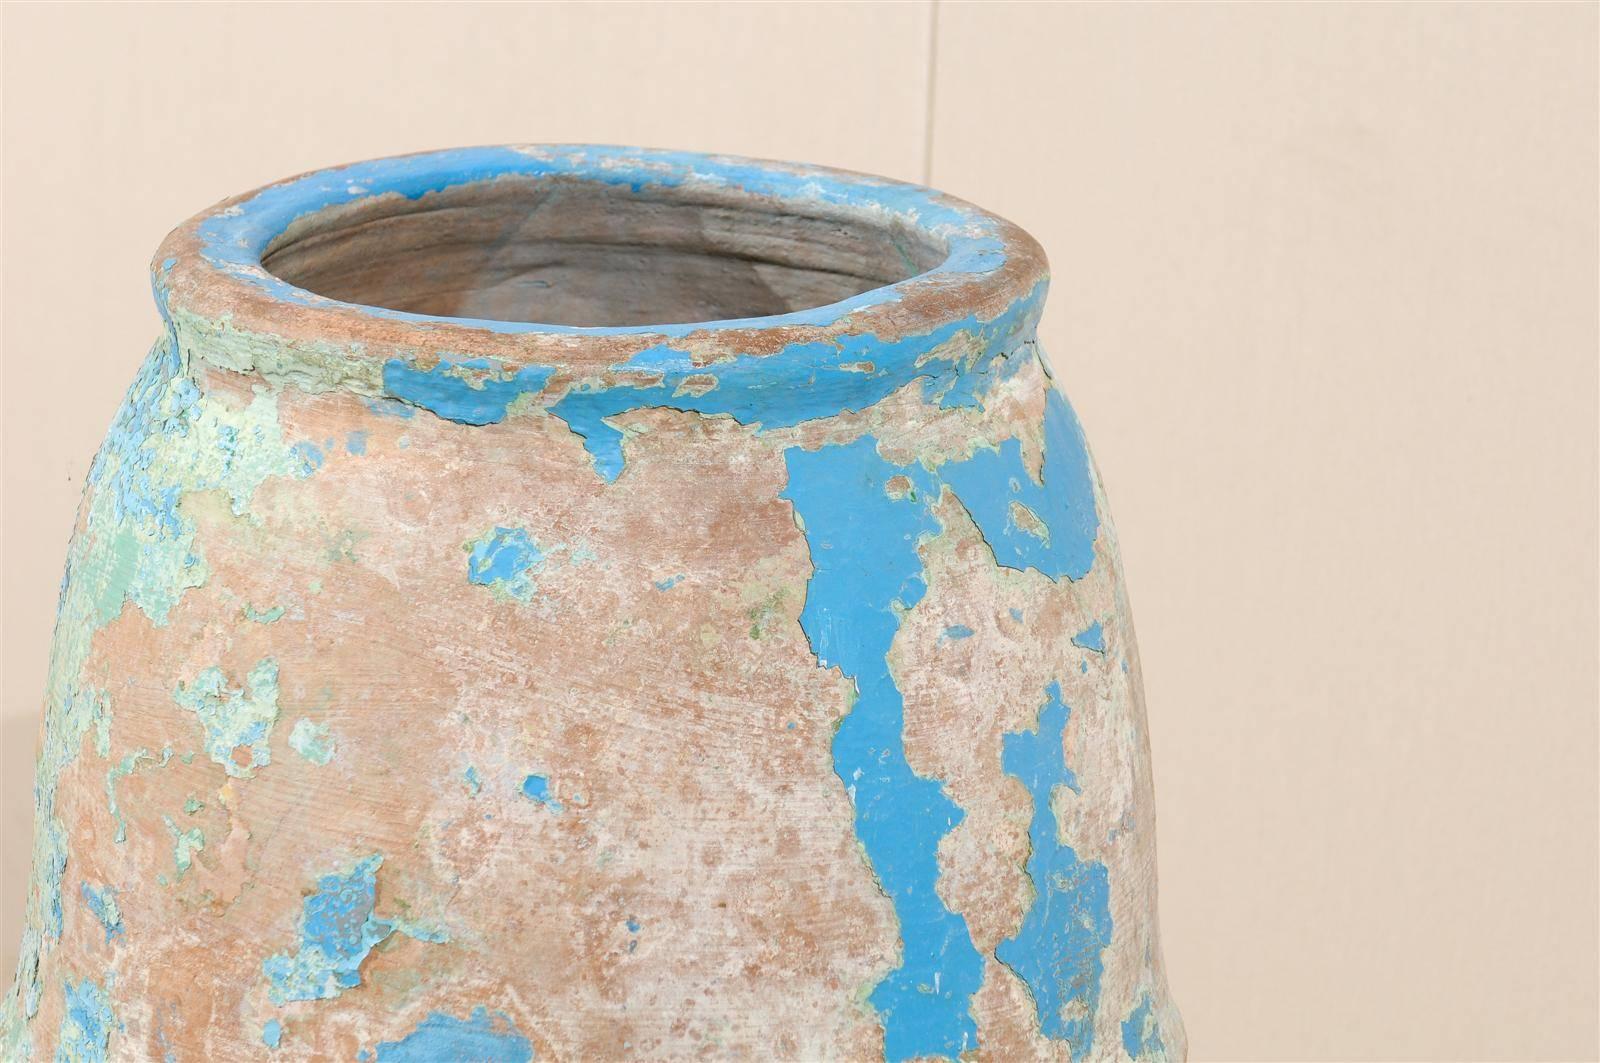 Spanish, Mid-19th C. Terracotta Olive Jar with Remains of Blue / Turquoise Paint 2